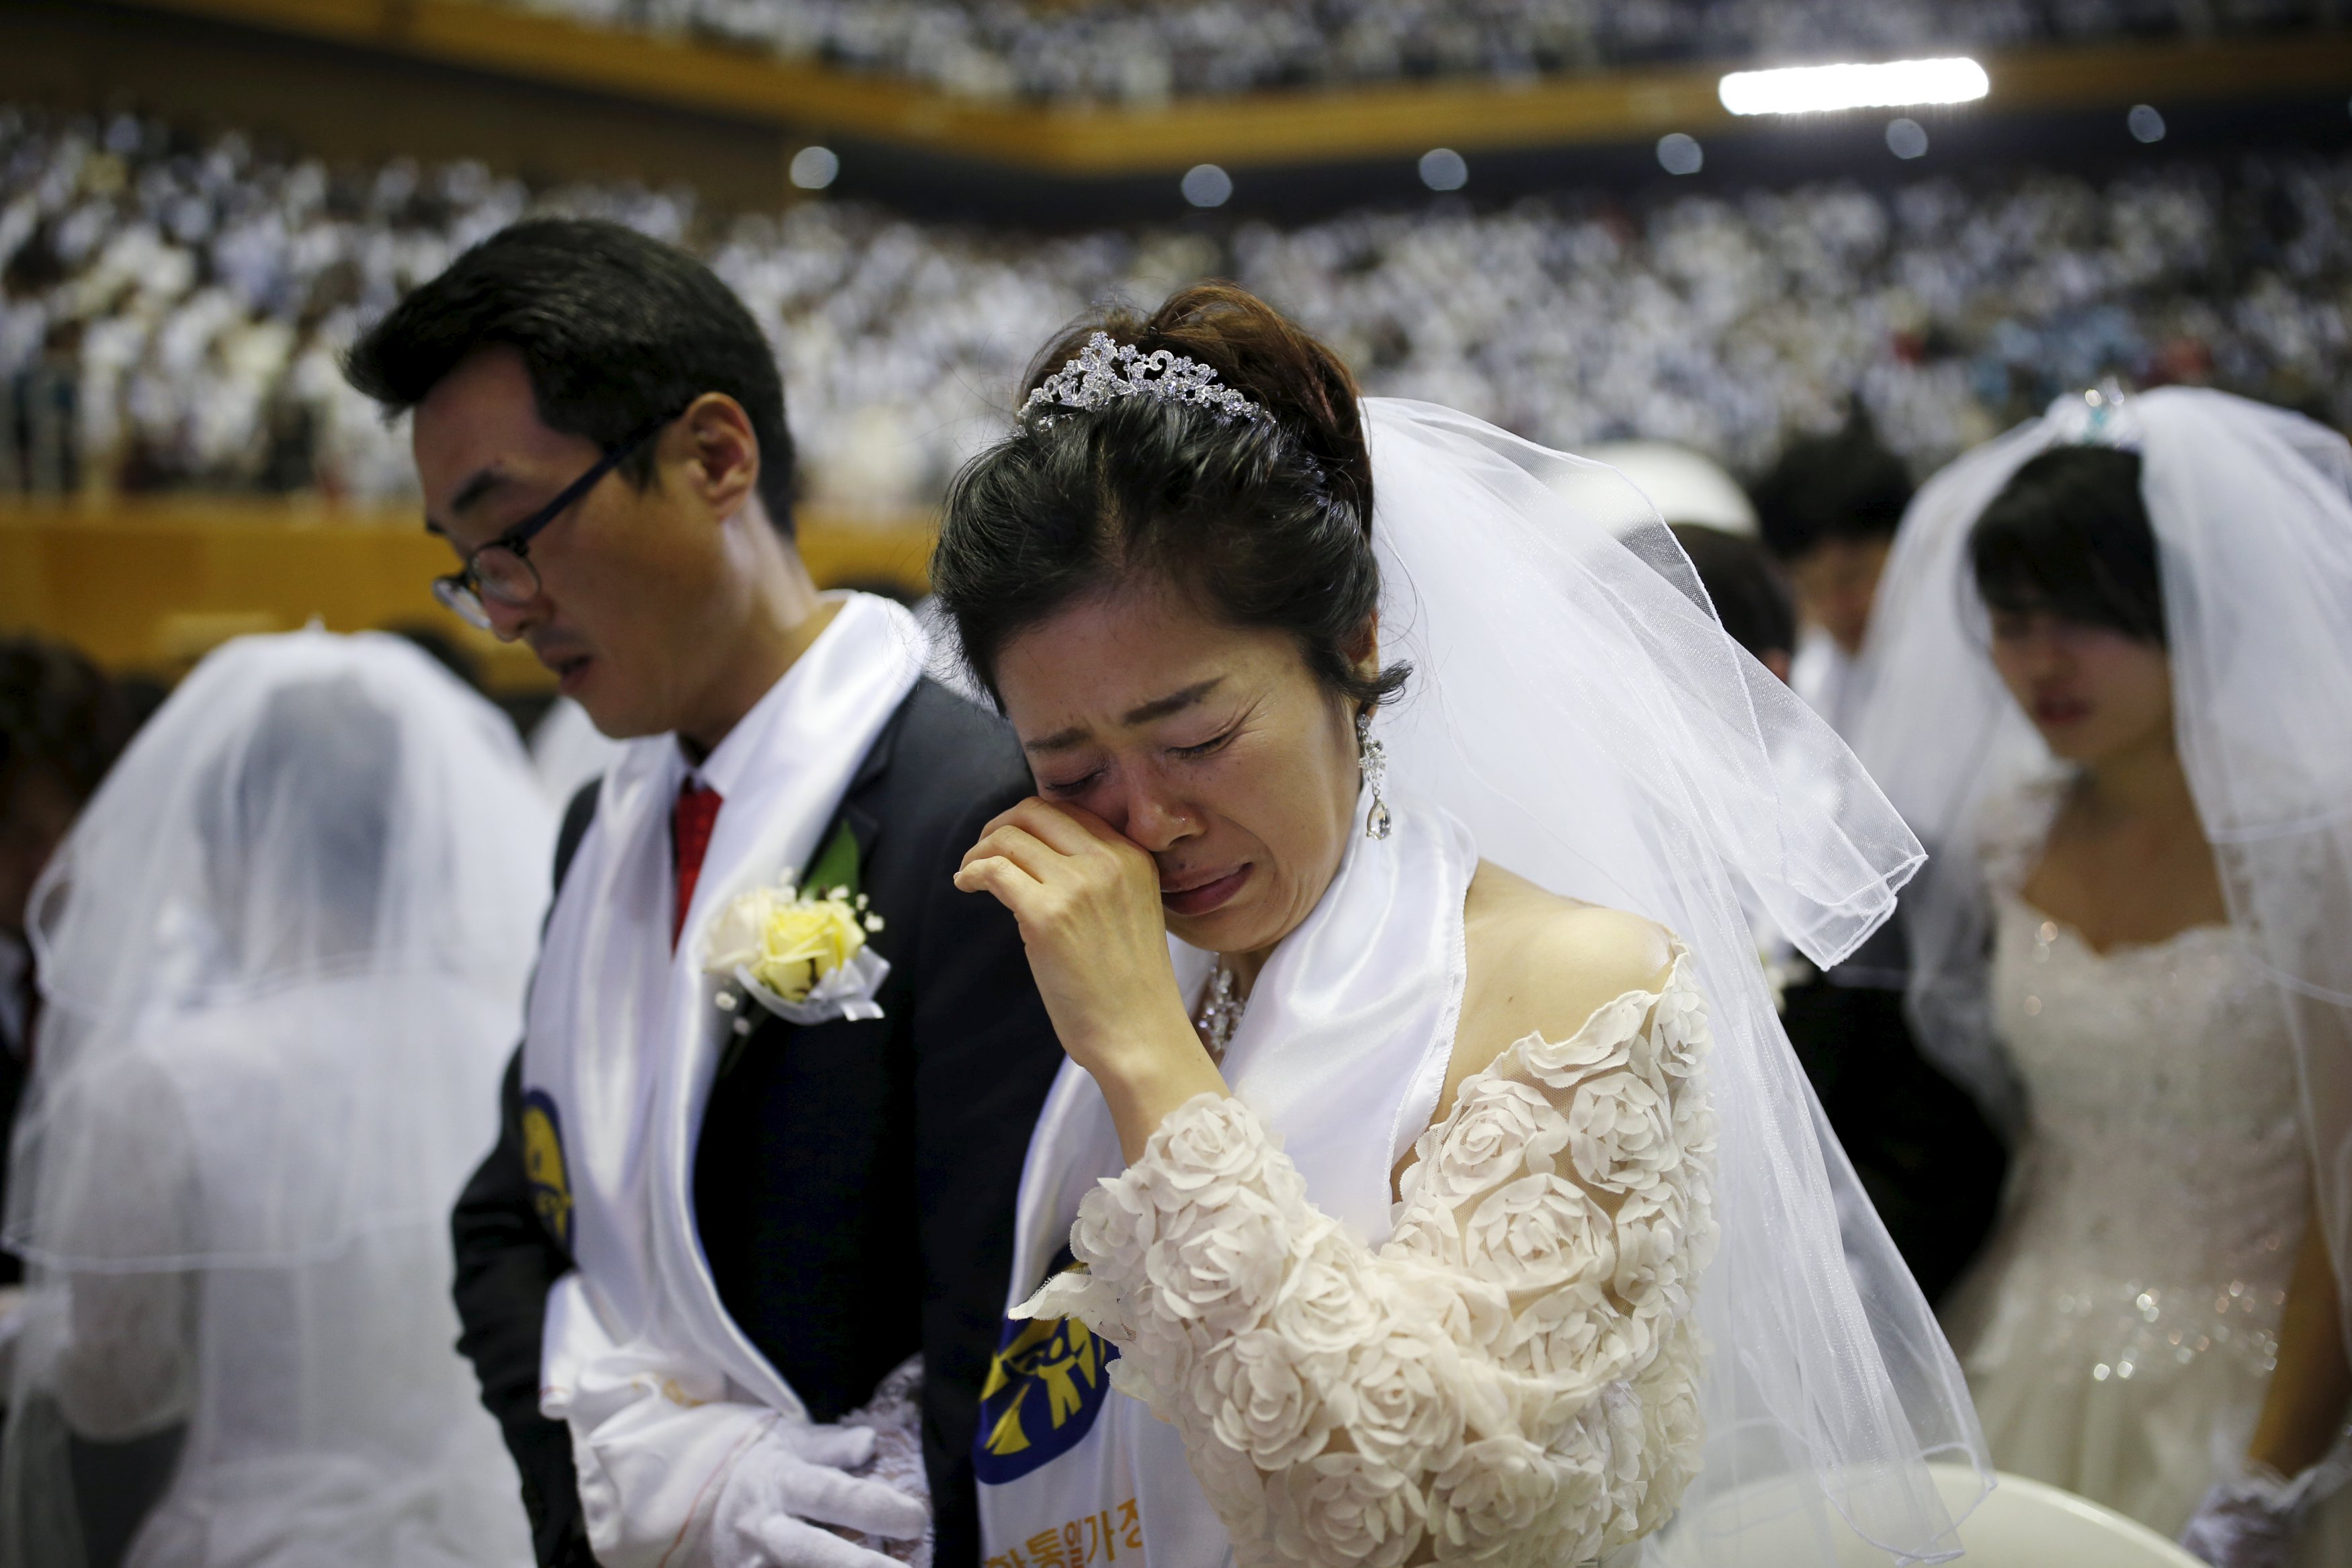 A bride cries during a mass wedding ceremony of the Unification Church at Cheongshim Peace World Centre in Gapyeong, South Korea, February 20, 2016. REUTERS/Kim Hong-Ji SOUTH KOREA-MASS WEDDING/